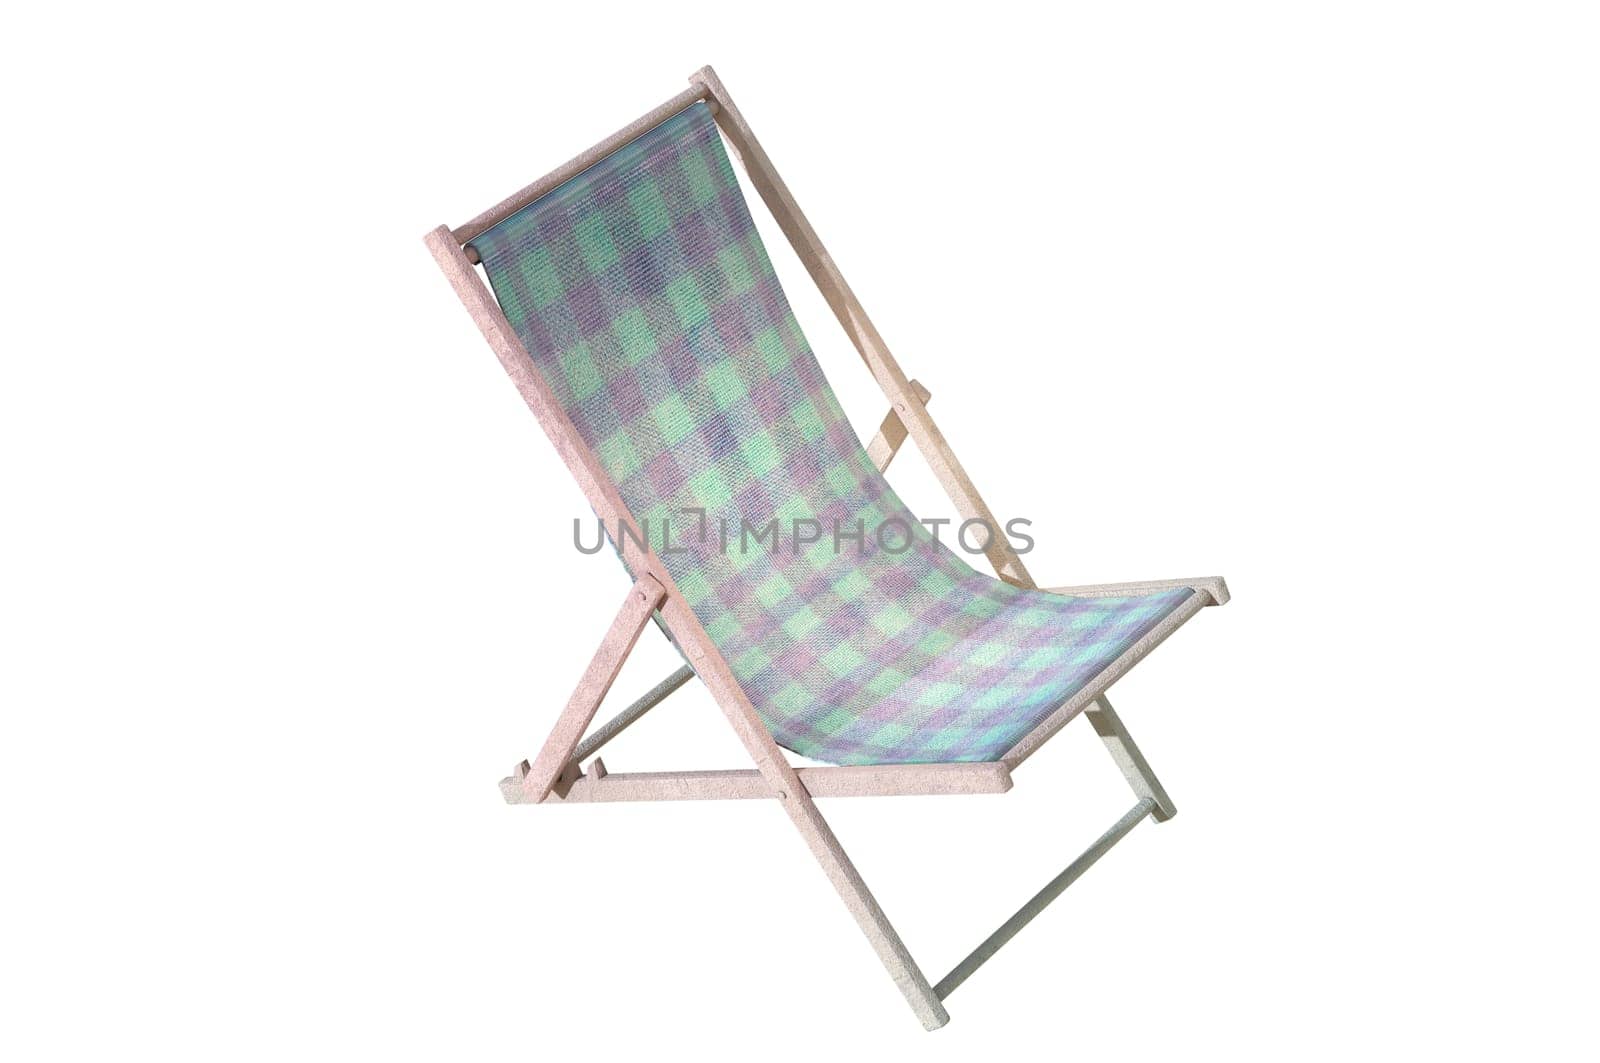 3D Illustration , Deck chair  on white background.  by Hepjam